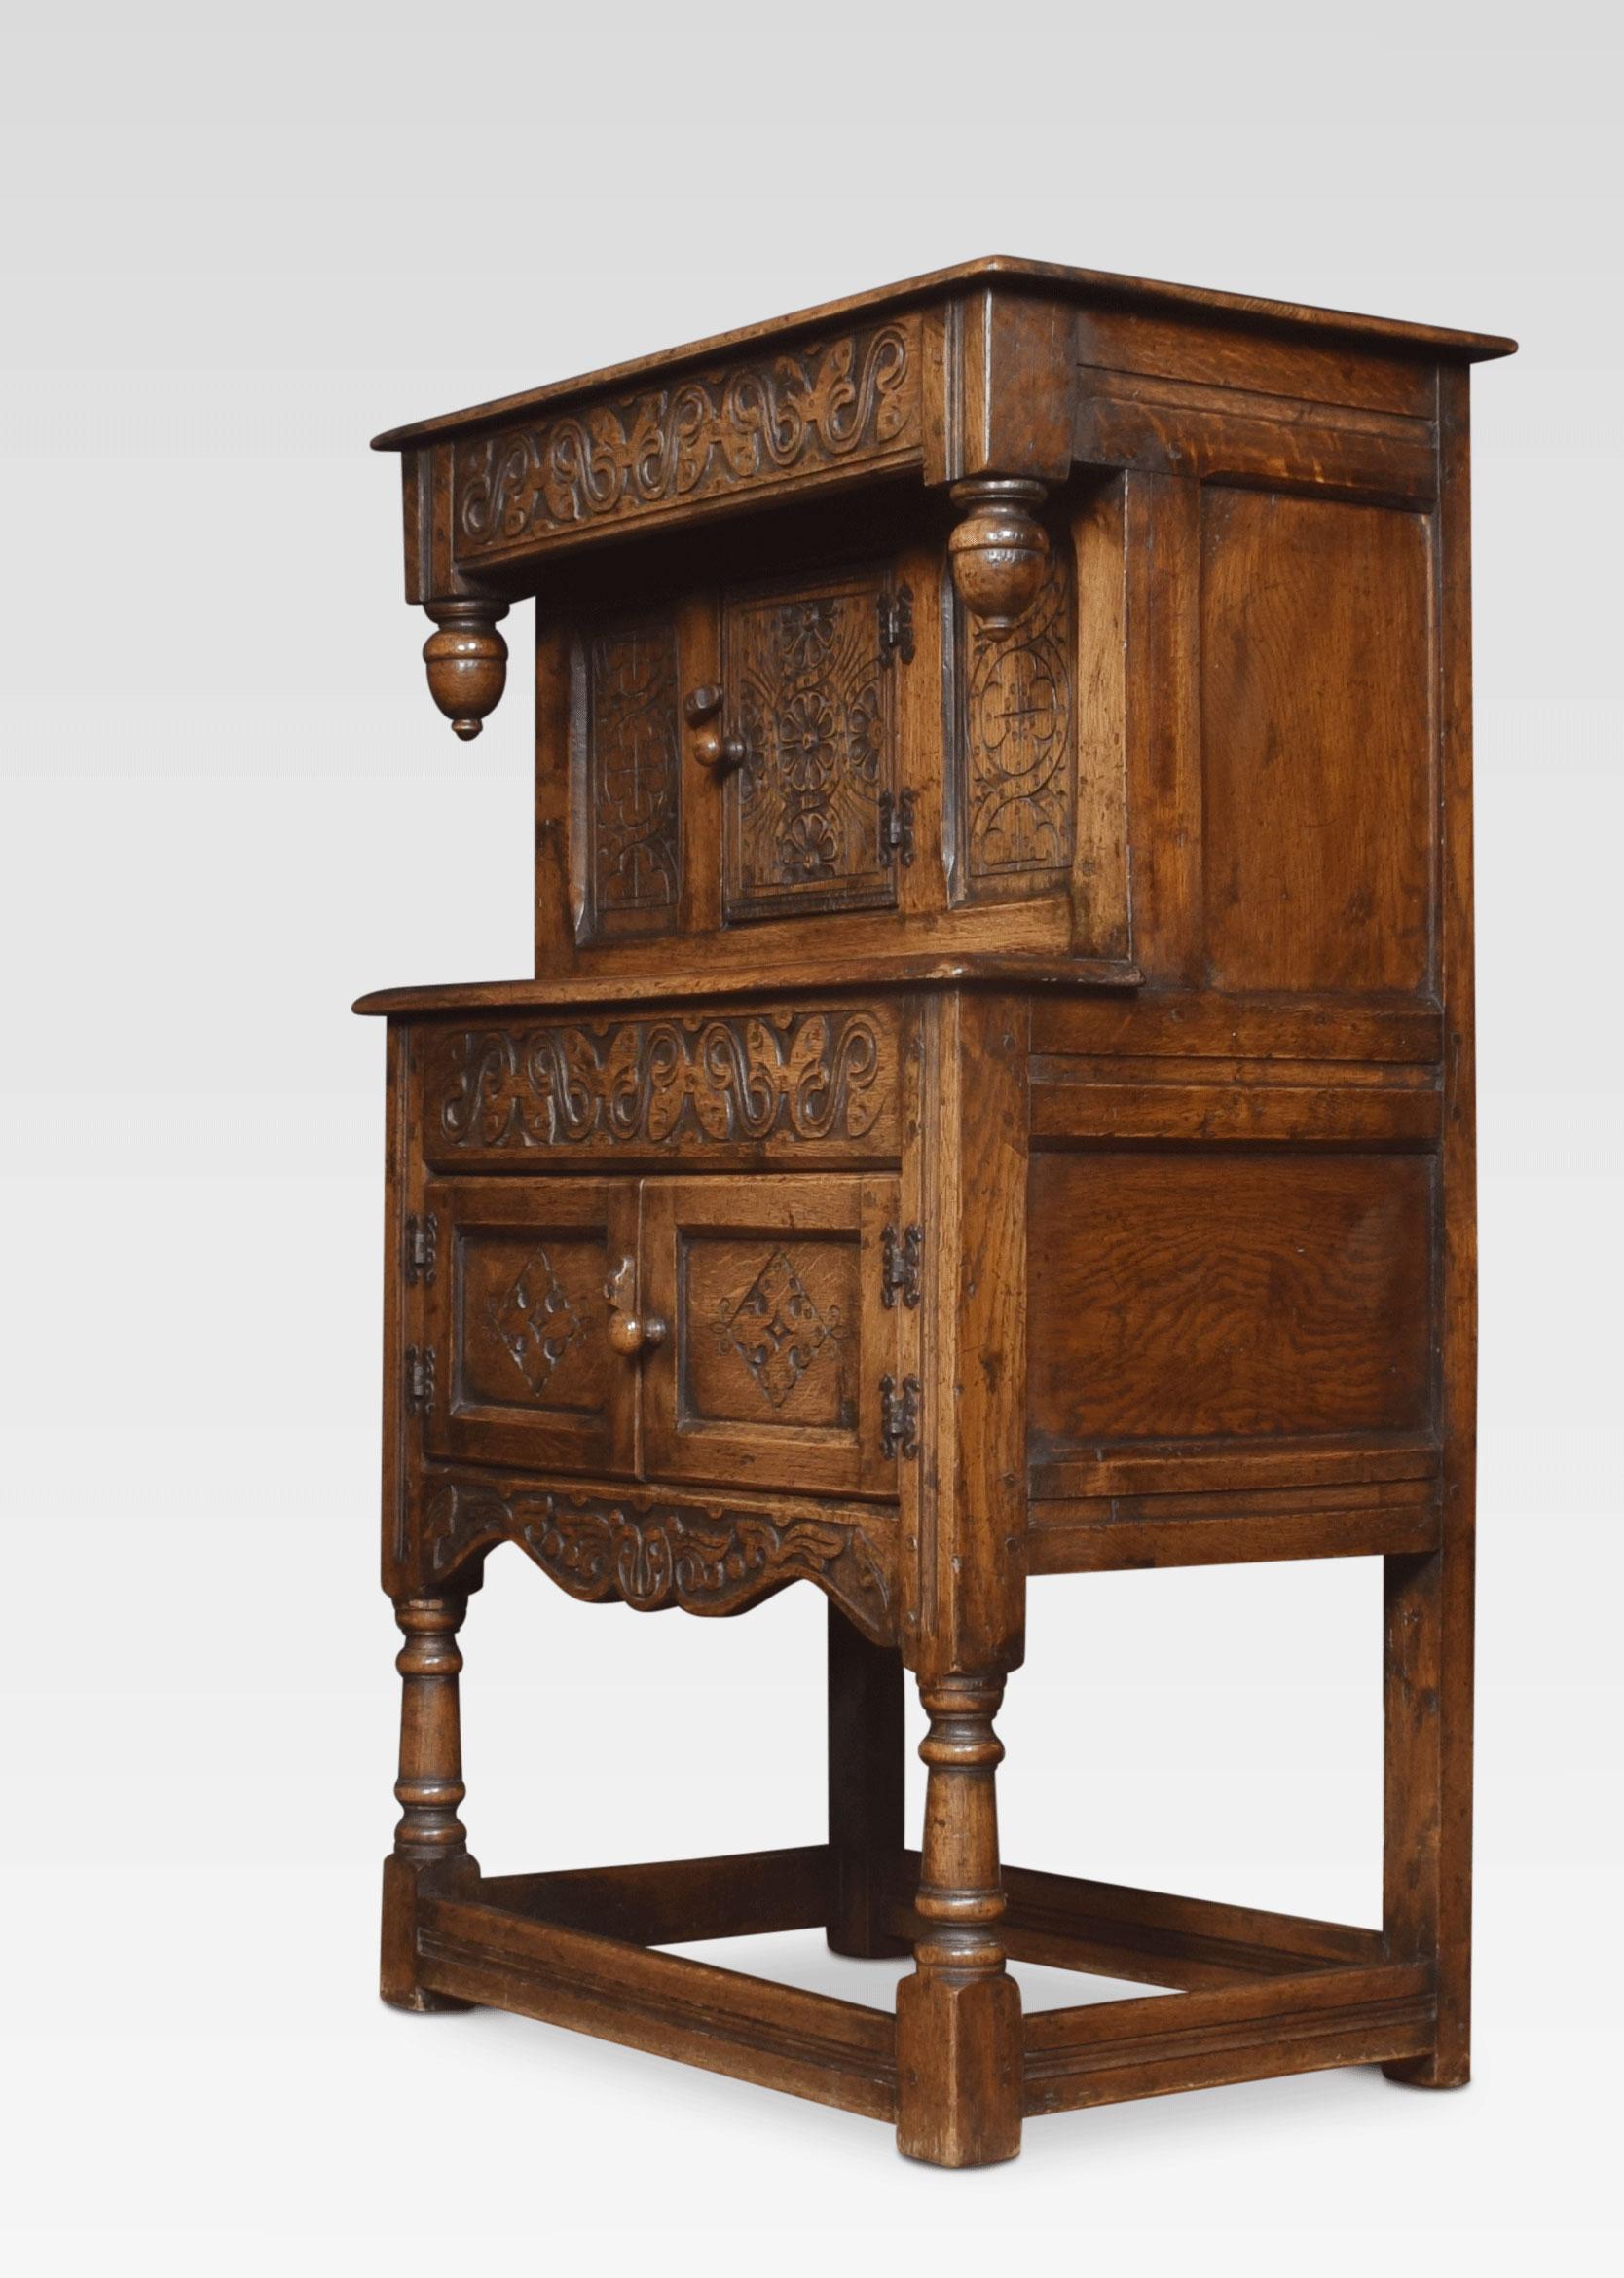 17th century style dwarf oak court cupboard, the frieze flanked by pendant finials, above single cupboard door and two cupboard doors below. Raised on turned and tapering legs united by stretcher.
Dimensions:
Height 45 inches
Width 29